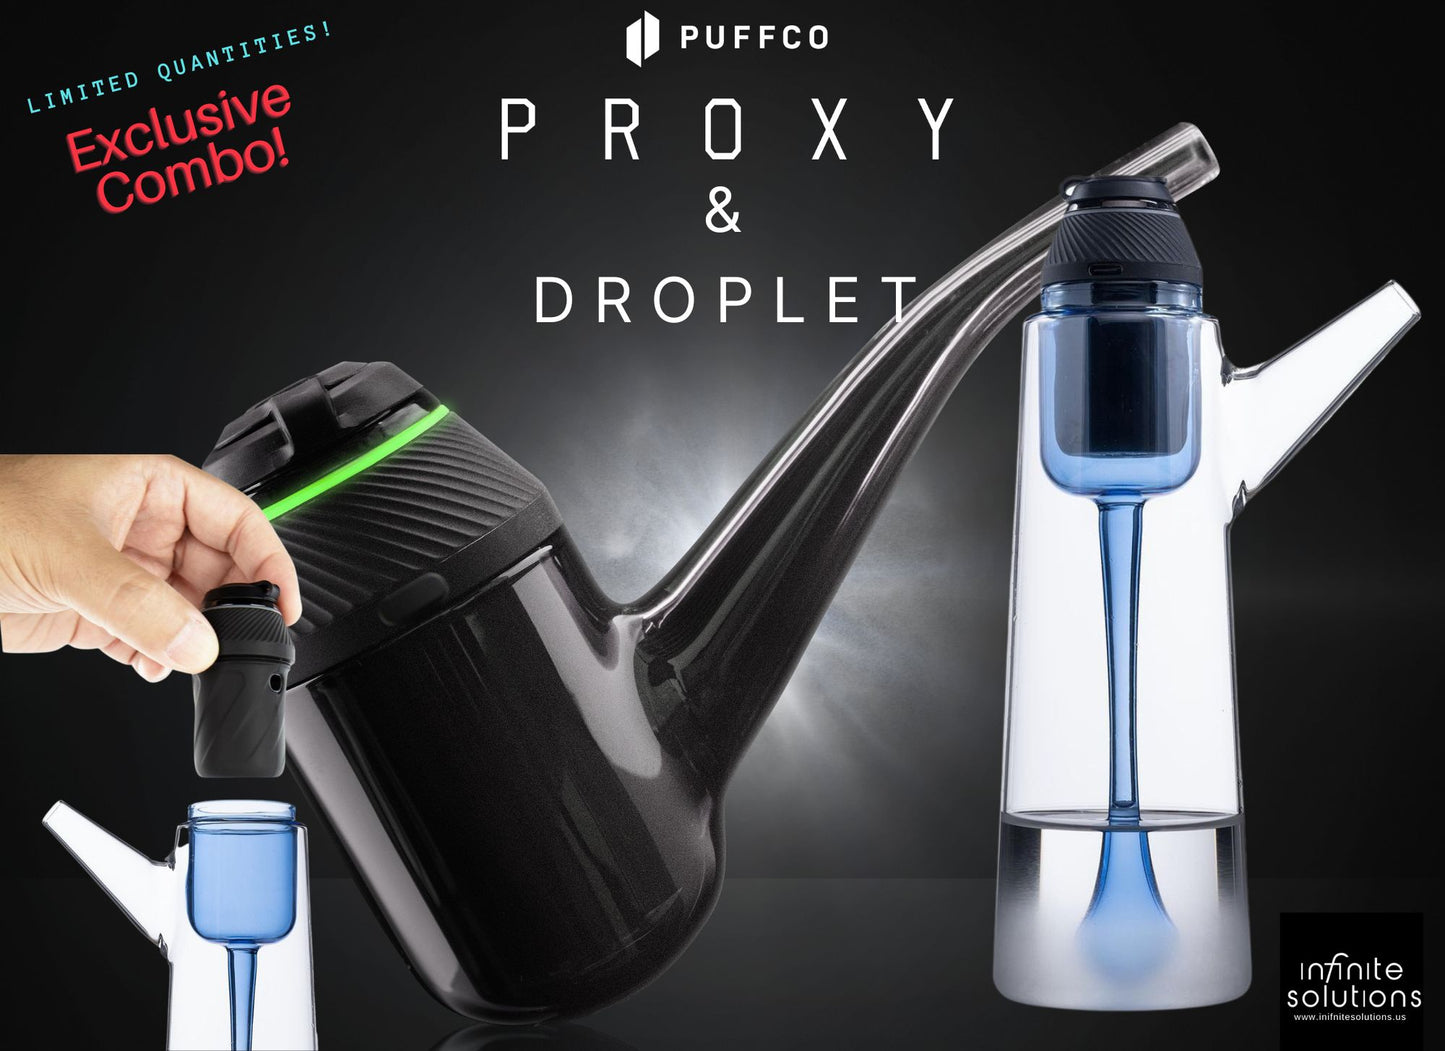 Puffco PROXY Concentrate Vaporizer Kit with The Proxy Droplet- Combo Pack